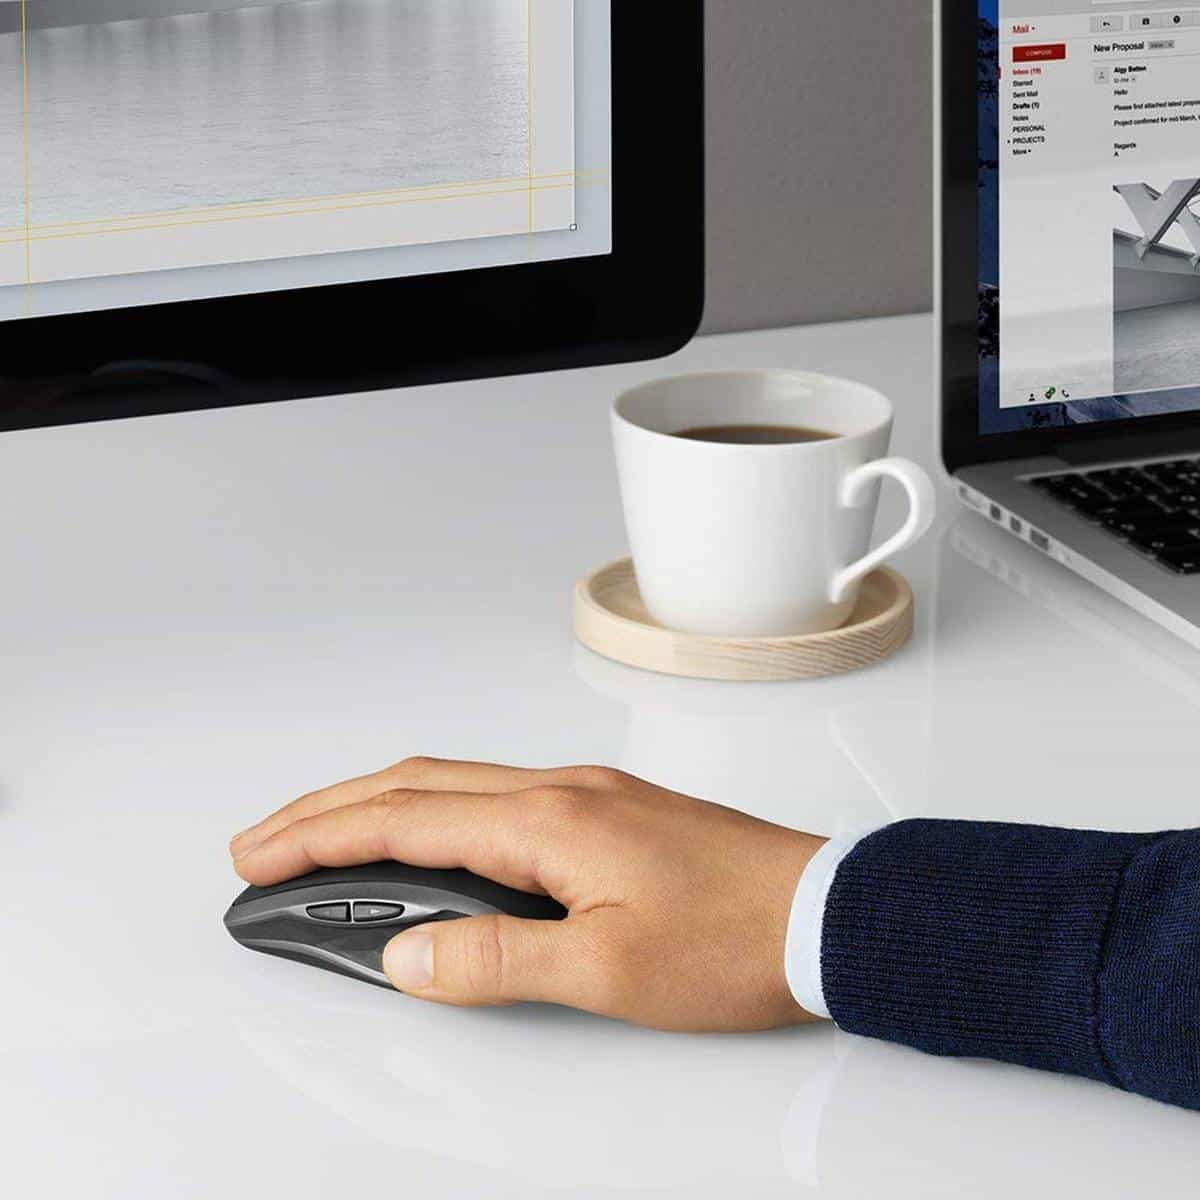 Logitech MX Anywhere 2S Wireless Mouse | Best Macbook Accessories for 2019